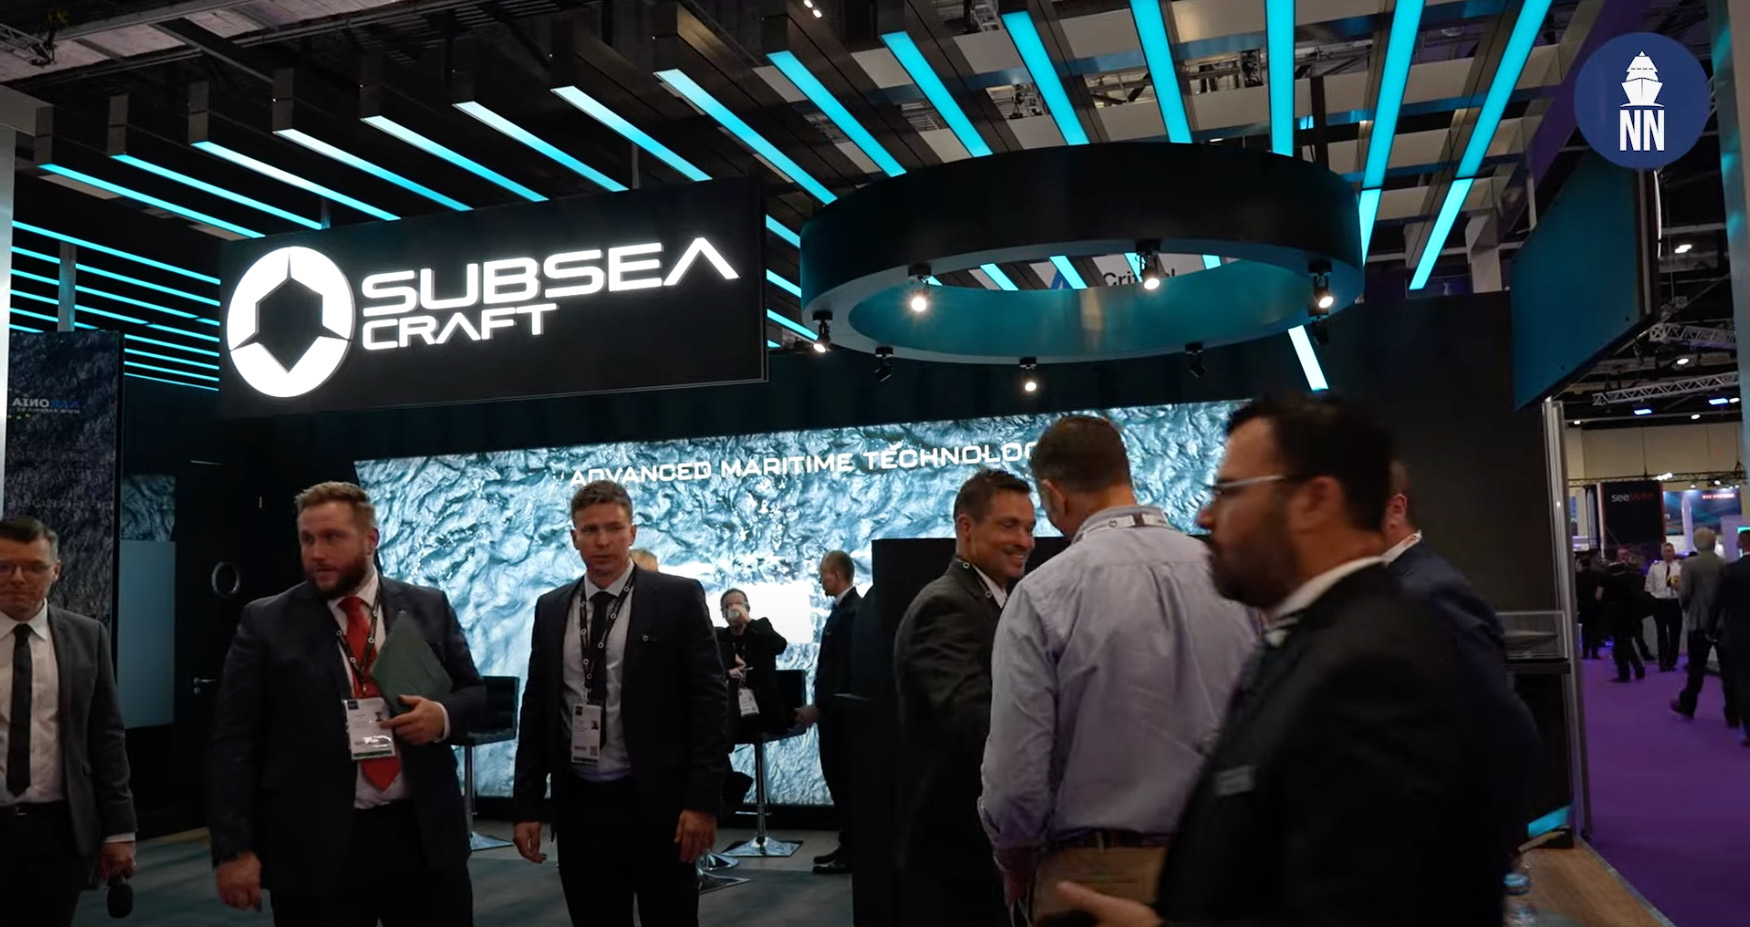 SubSea Craft at DSEI London – with Naval News